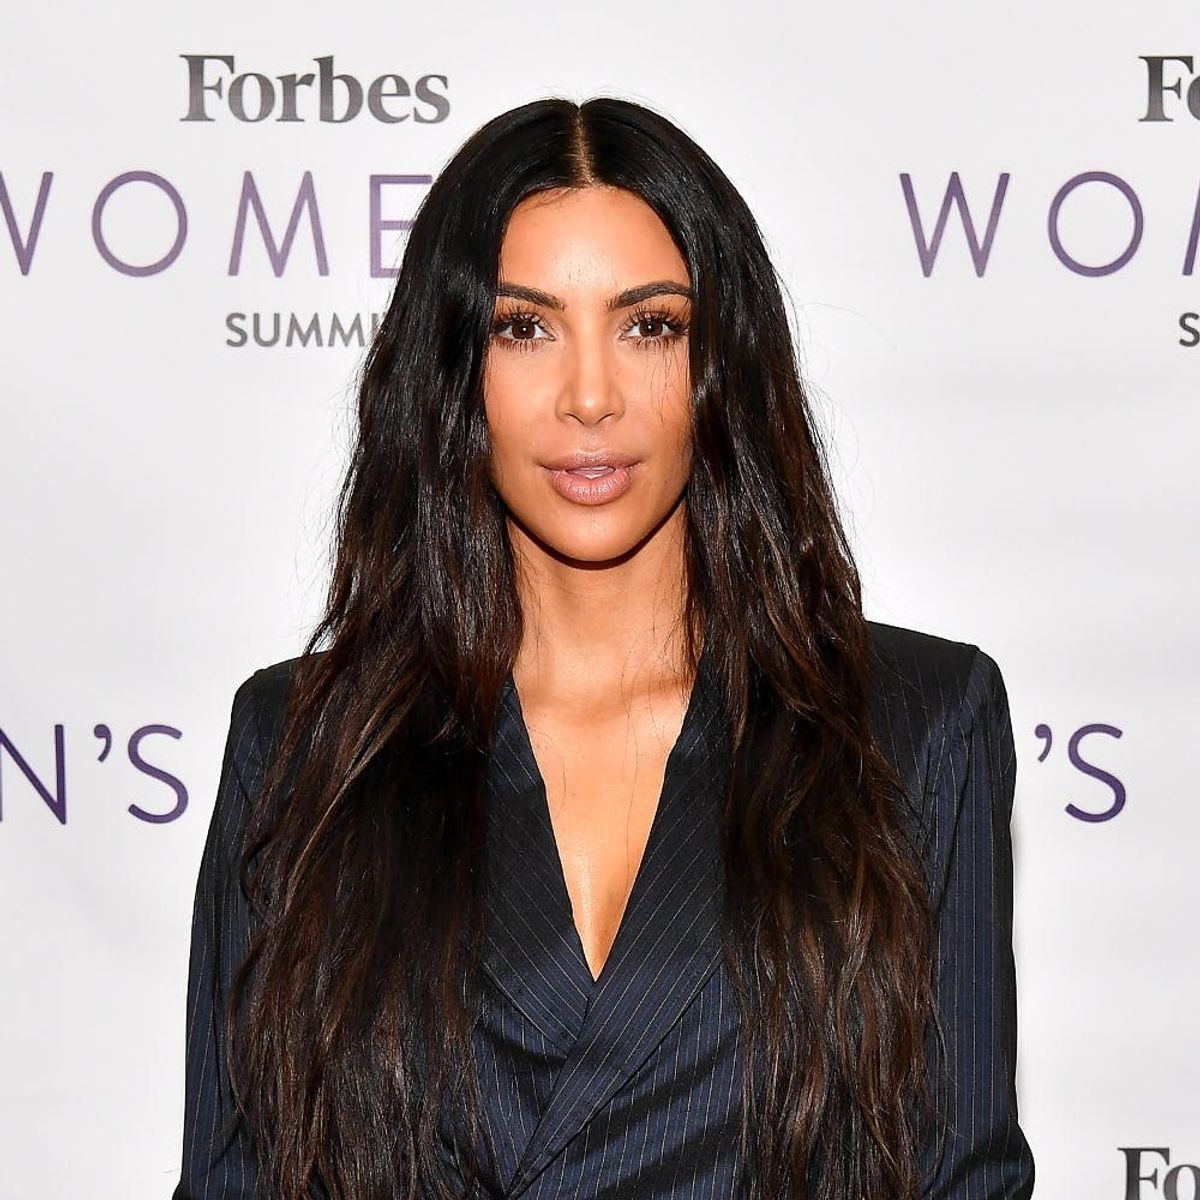 Kim Kardashian Has Some Surprising Thoughts About the Feud With Caitlyn Jenner